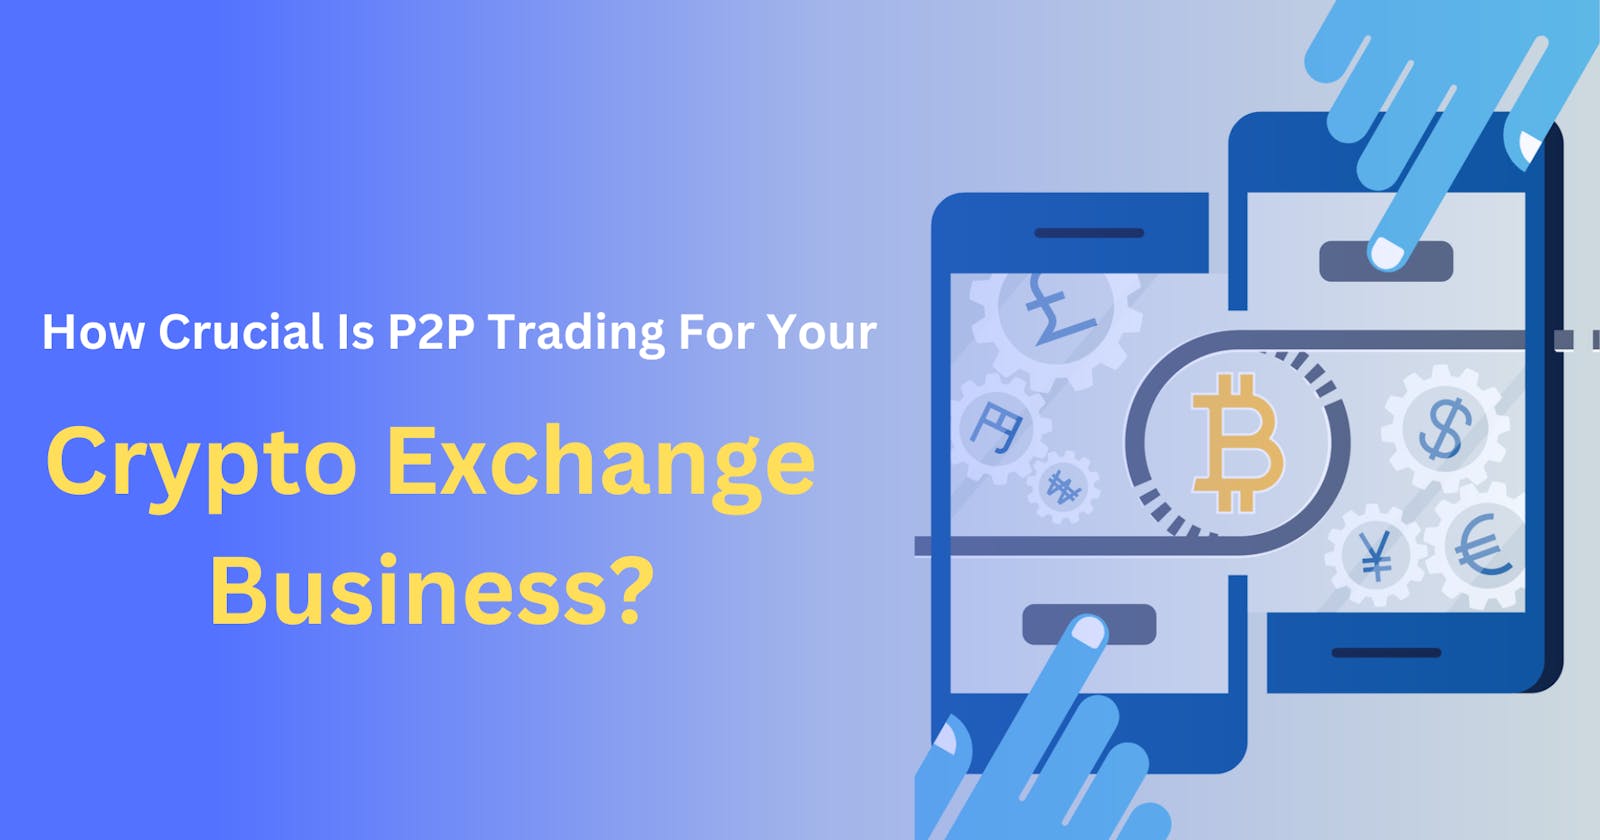 How Crucial Is P2P Trading For Your Crypto Exchange Business?